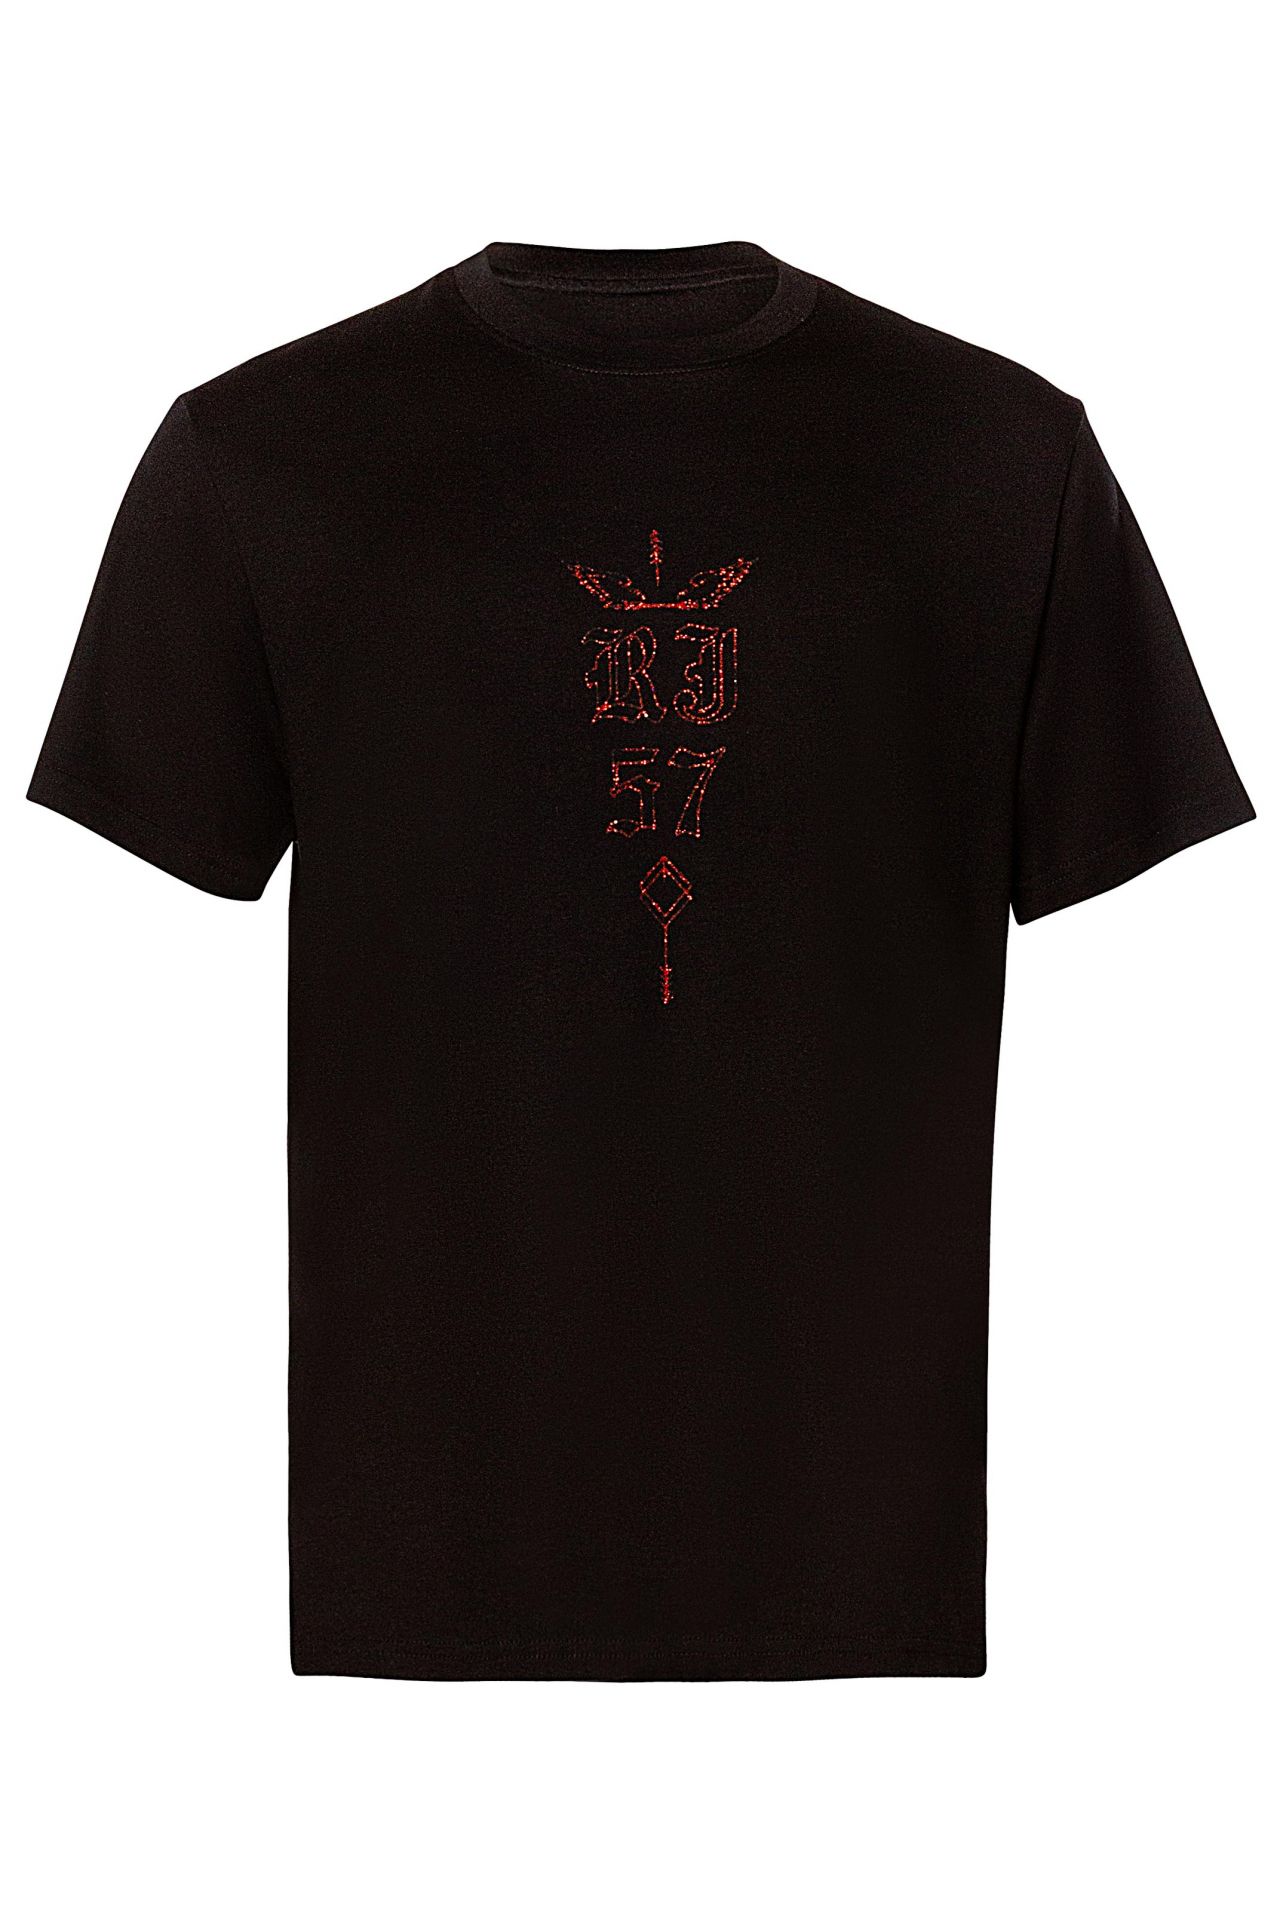 MOTH VECTOR TEE IN RED GLITTER ON BLACK